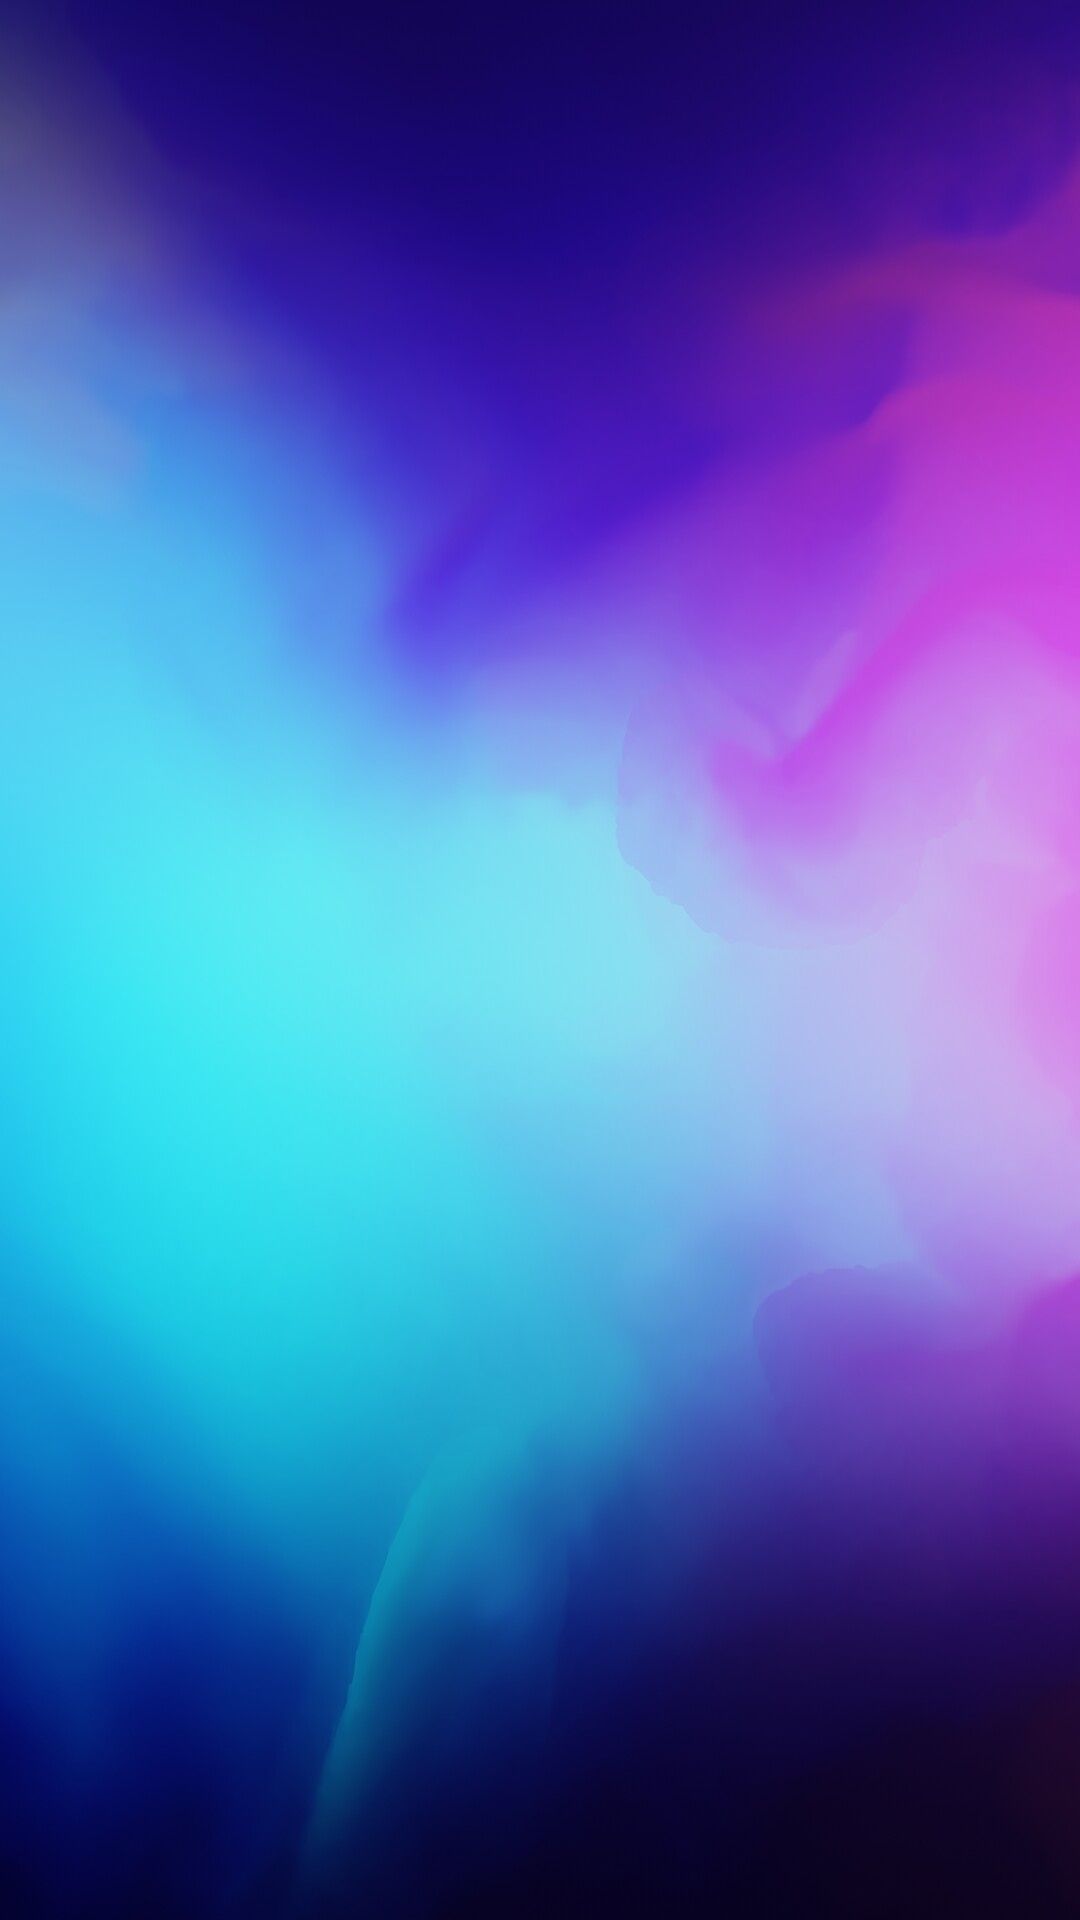 Colorful Backgrounds For Phone - HD Wallpaper 